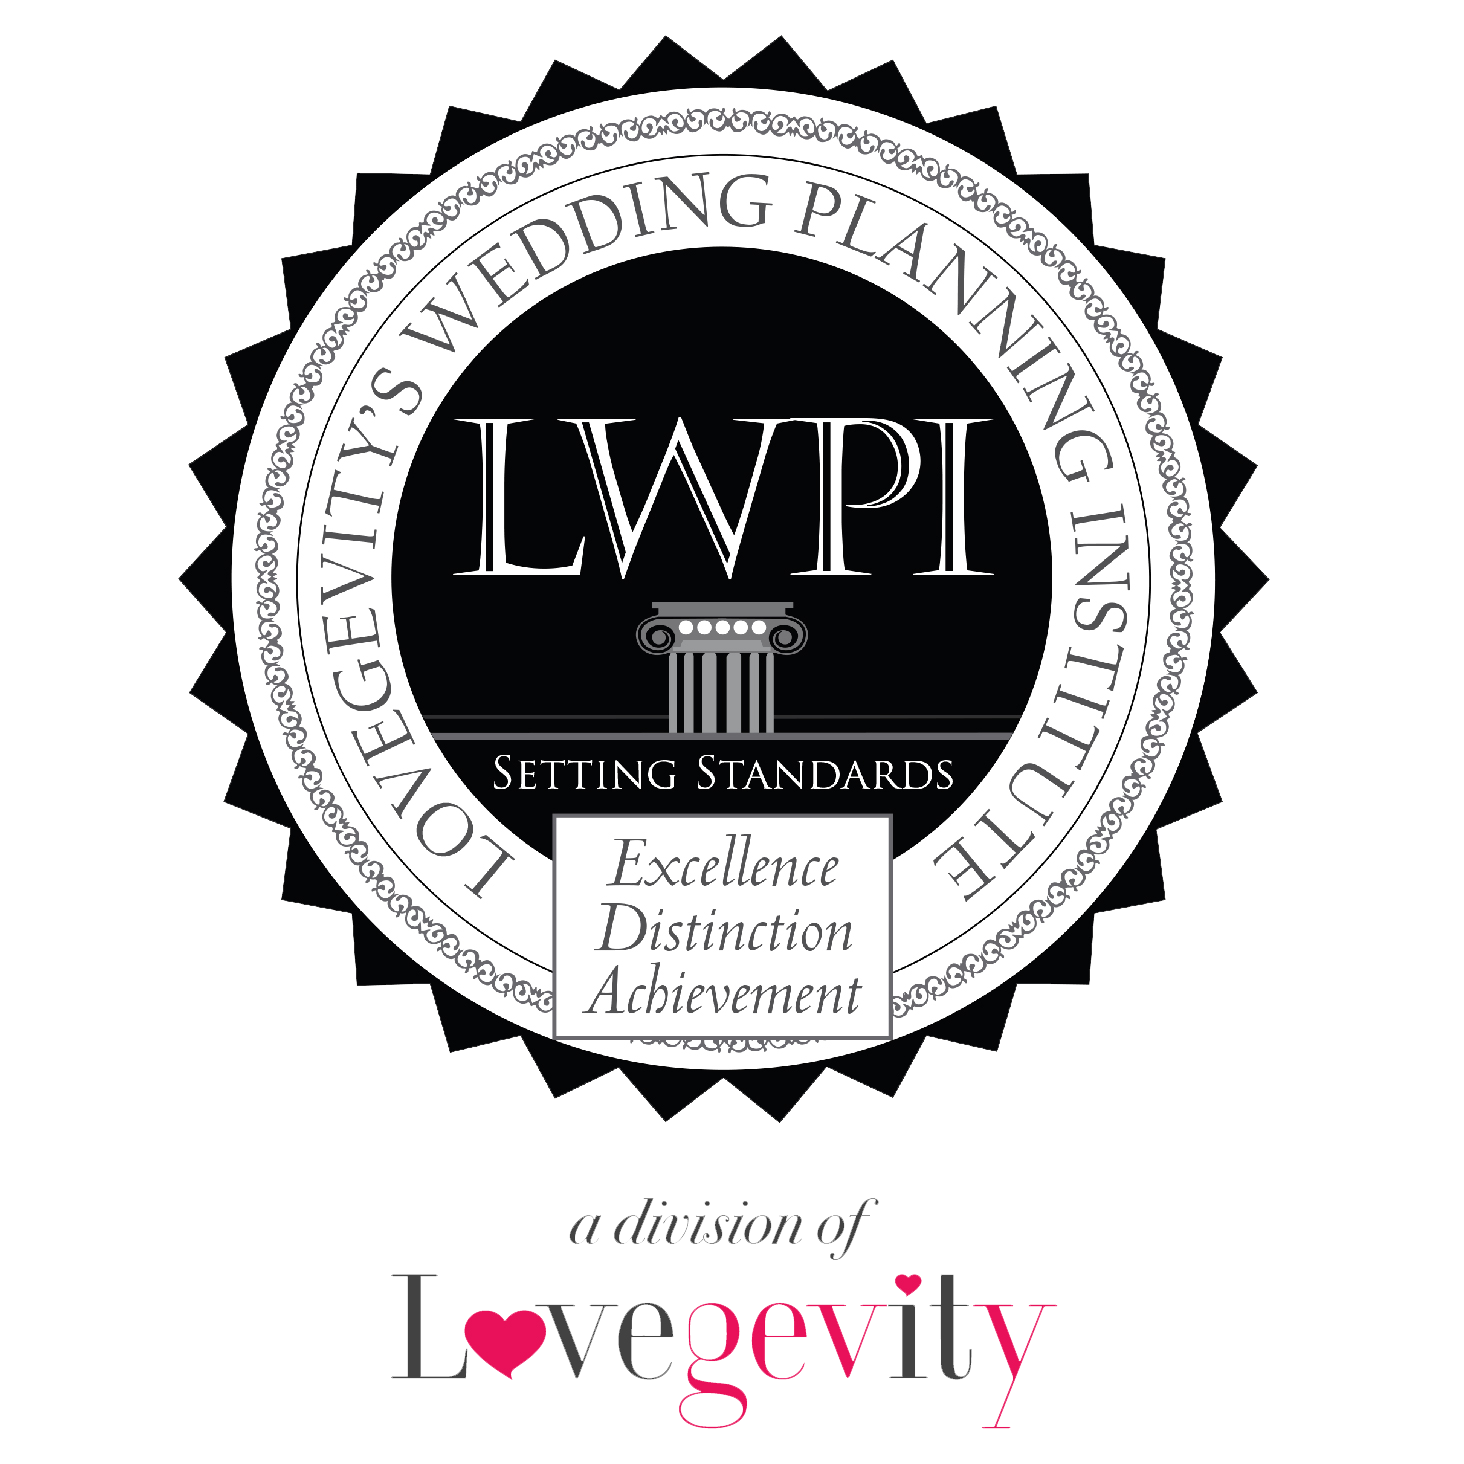 Lovegevity's Wedding Planning Institute logo with text Setting Standards Excellence Distinction Achievement